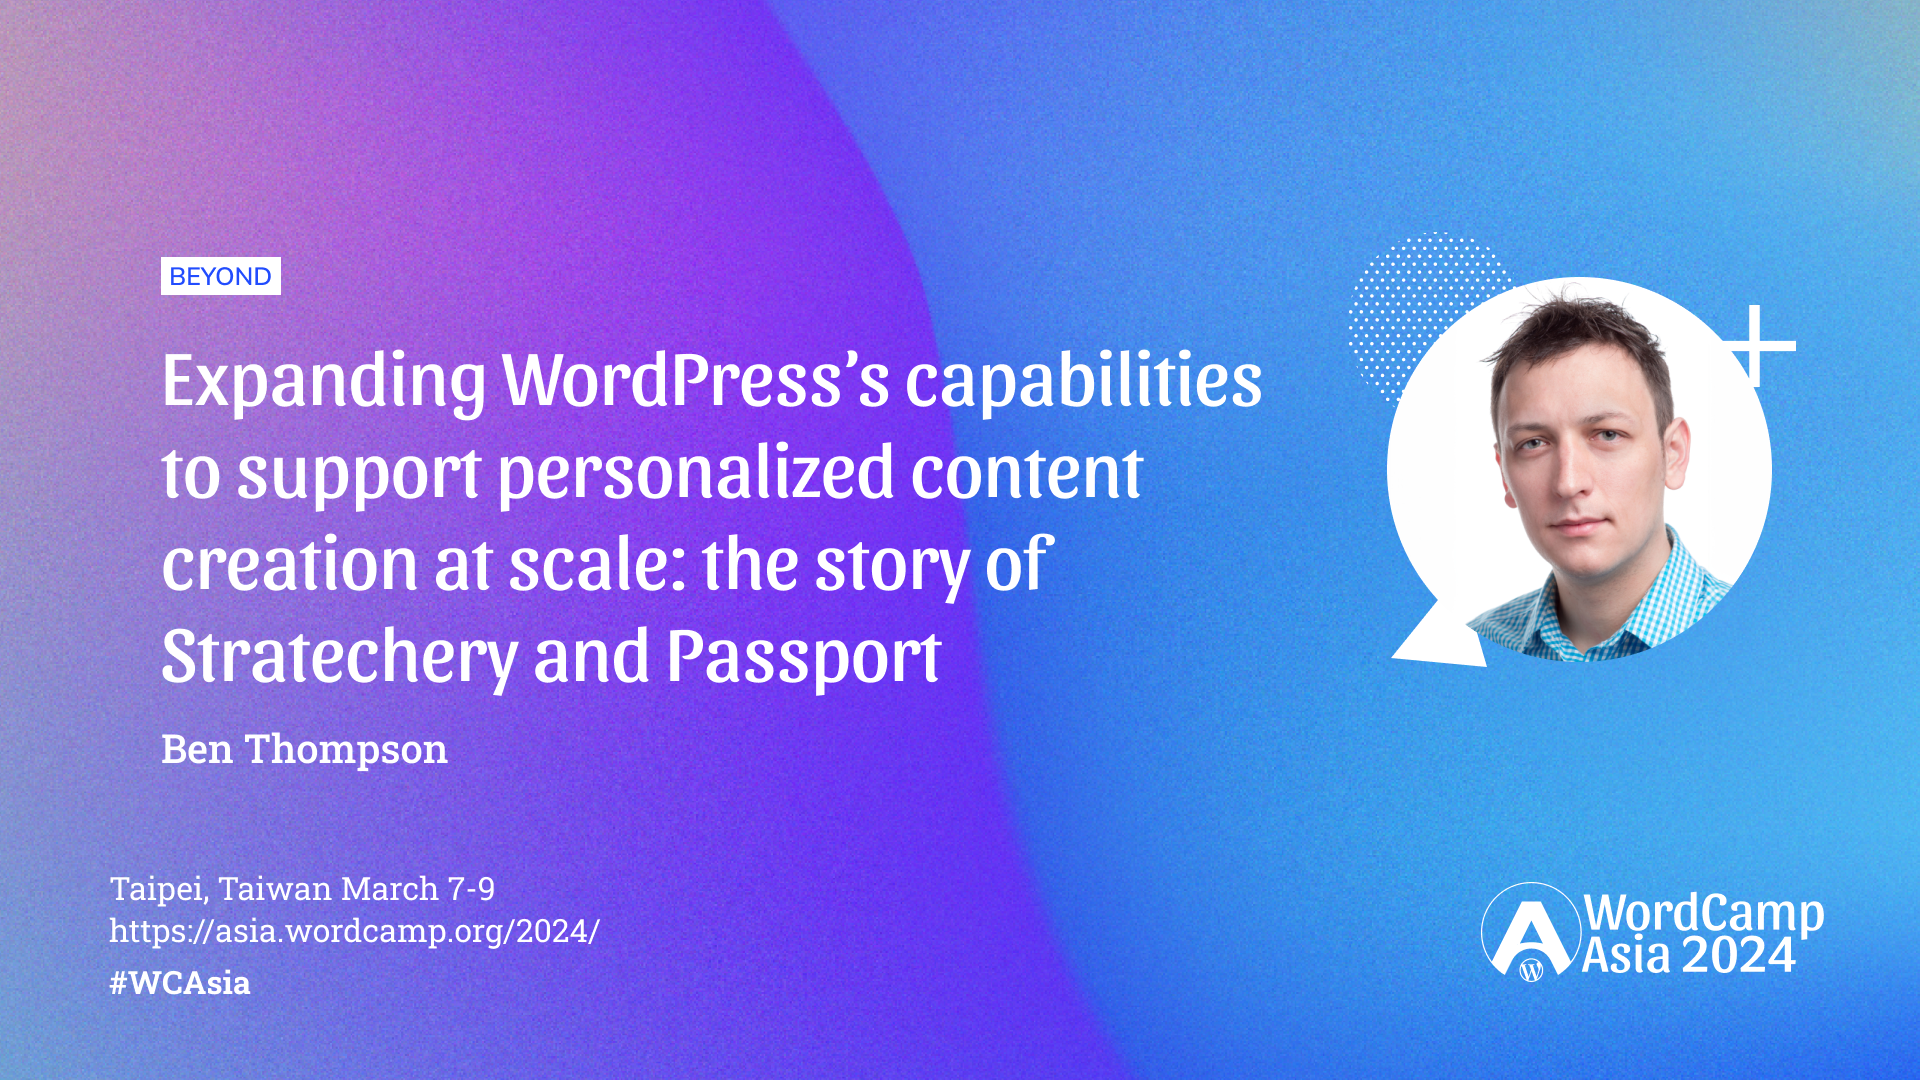 Expanding WordPress’s capabilities to support personalized content creation at scale: the story of Stratechery and Passport